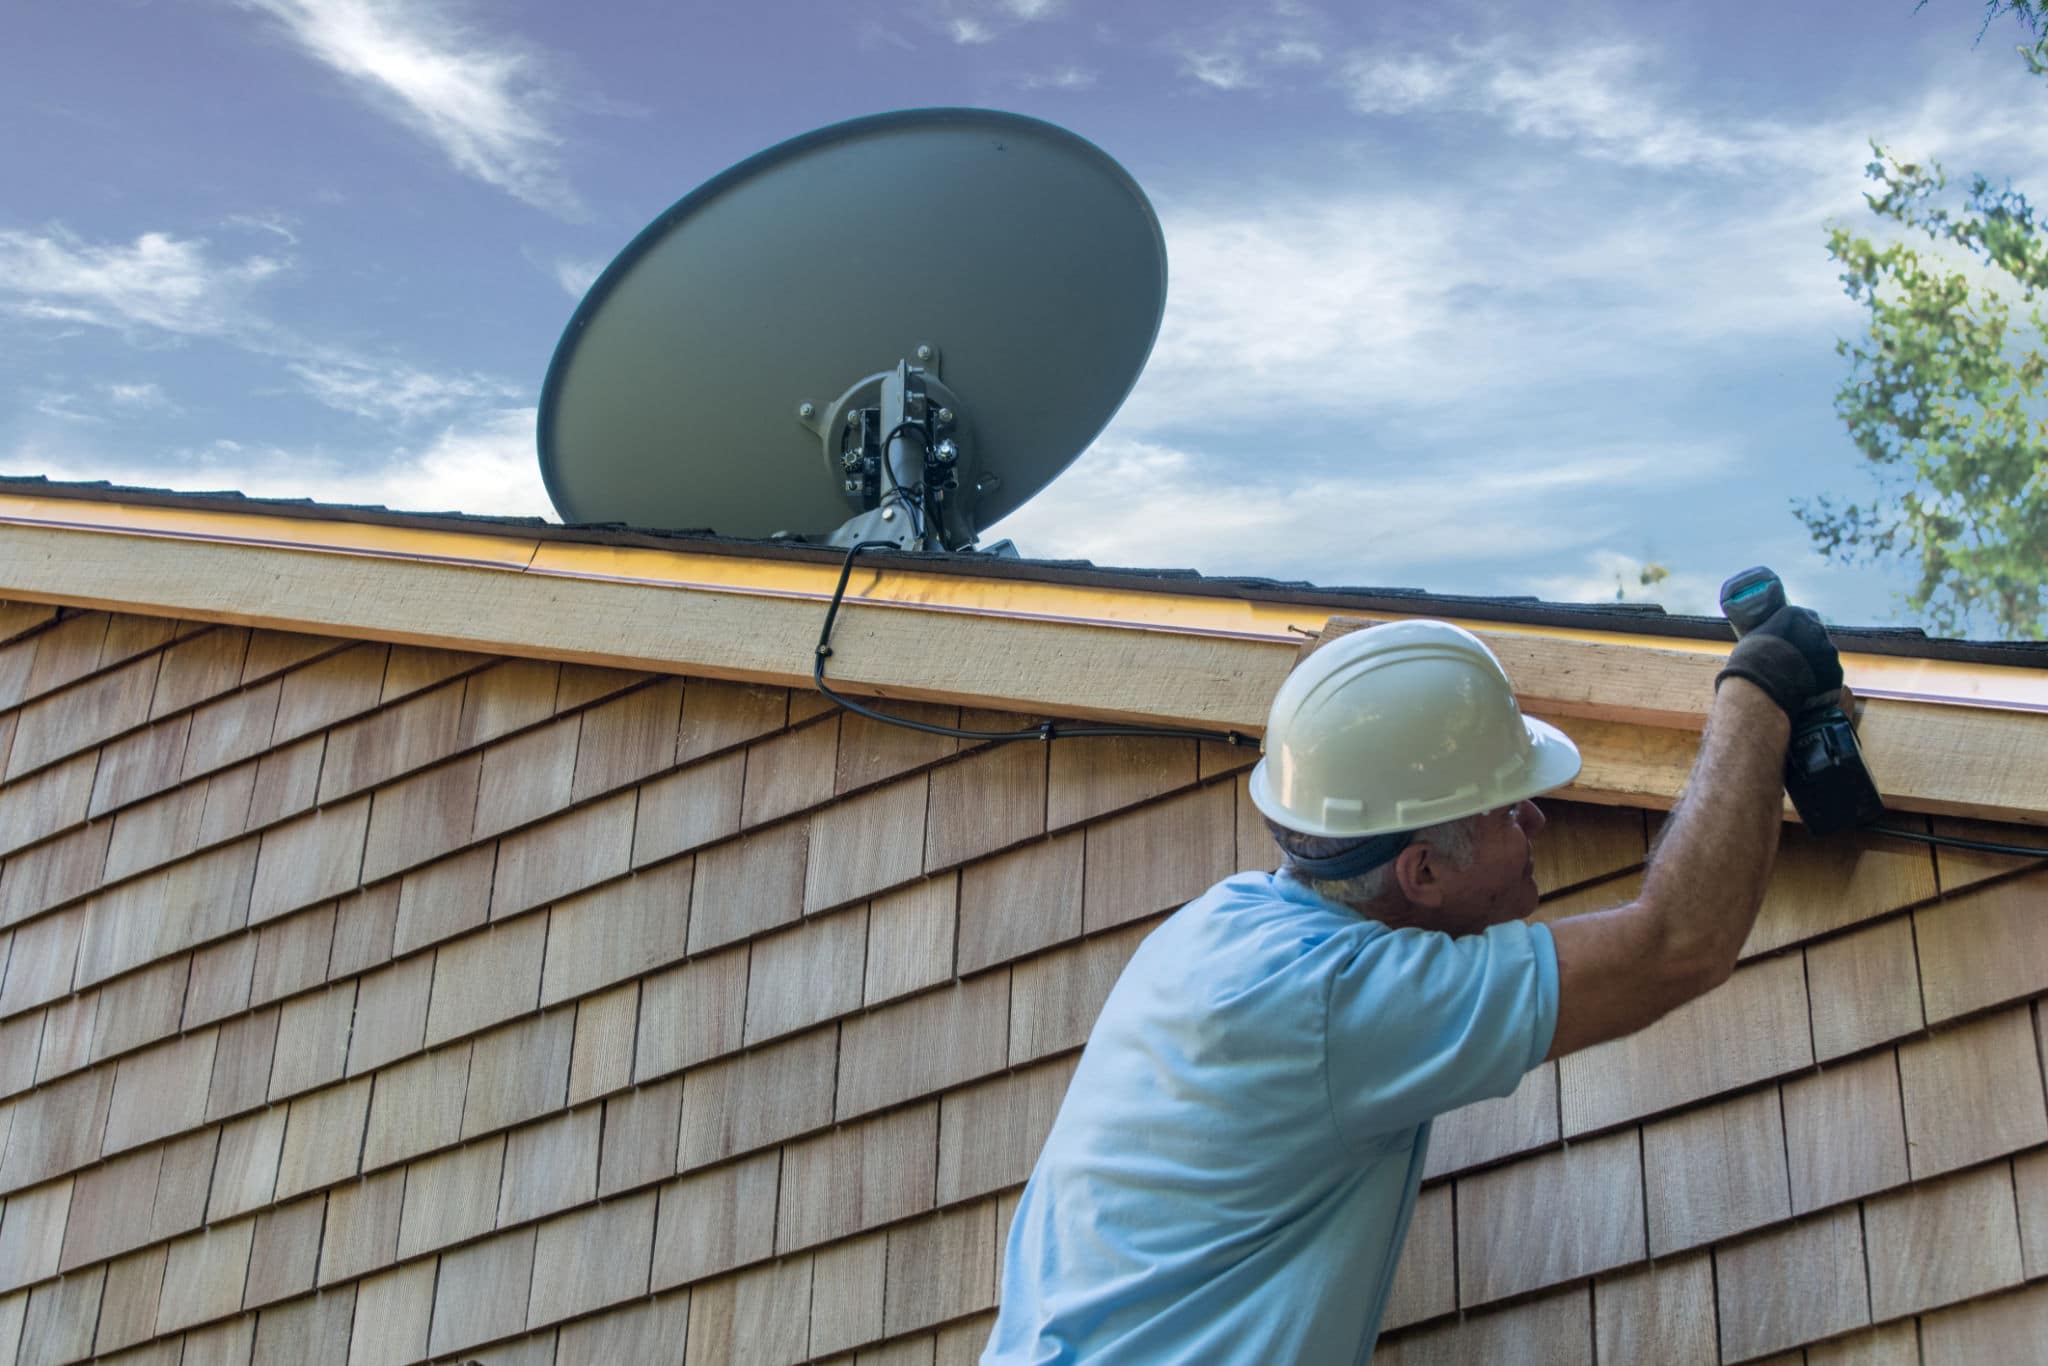 Man installing Satellite Dish on roof of  house